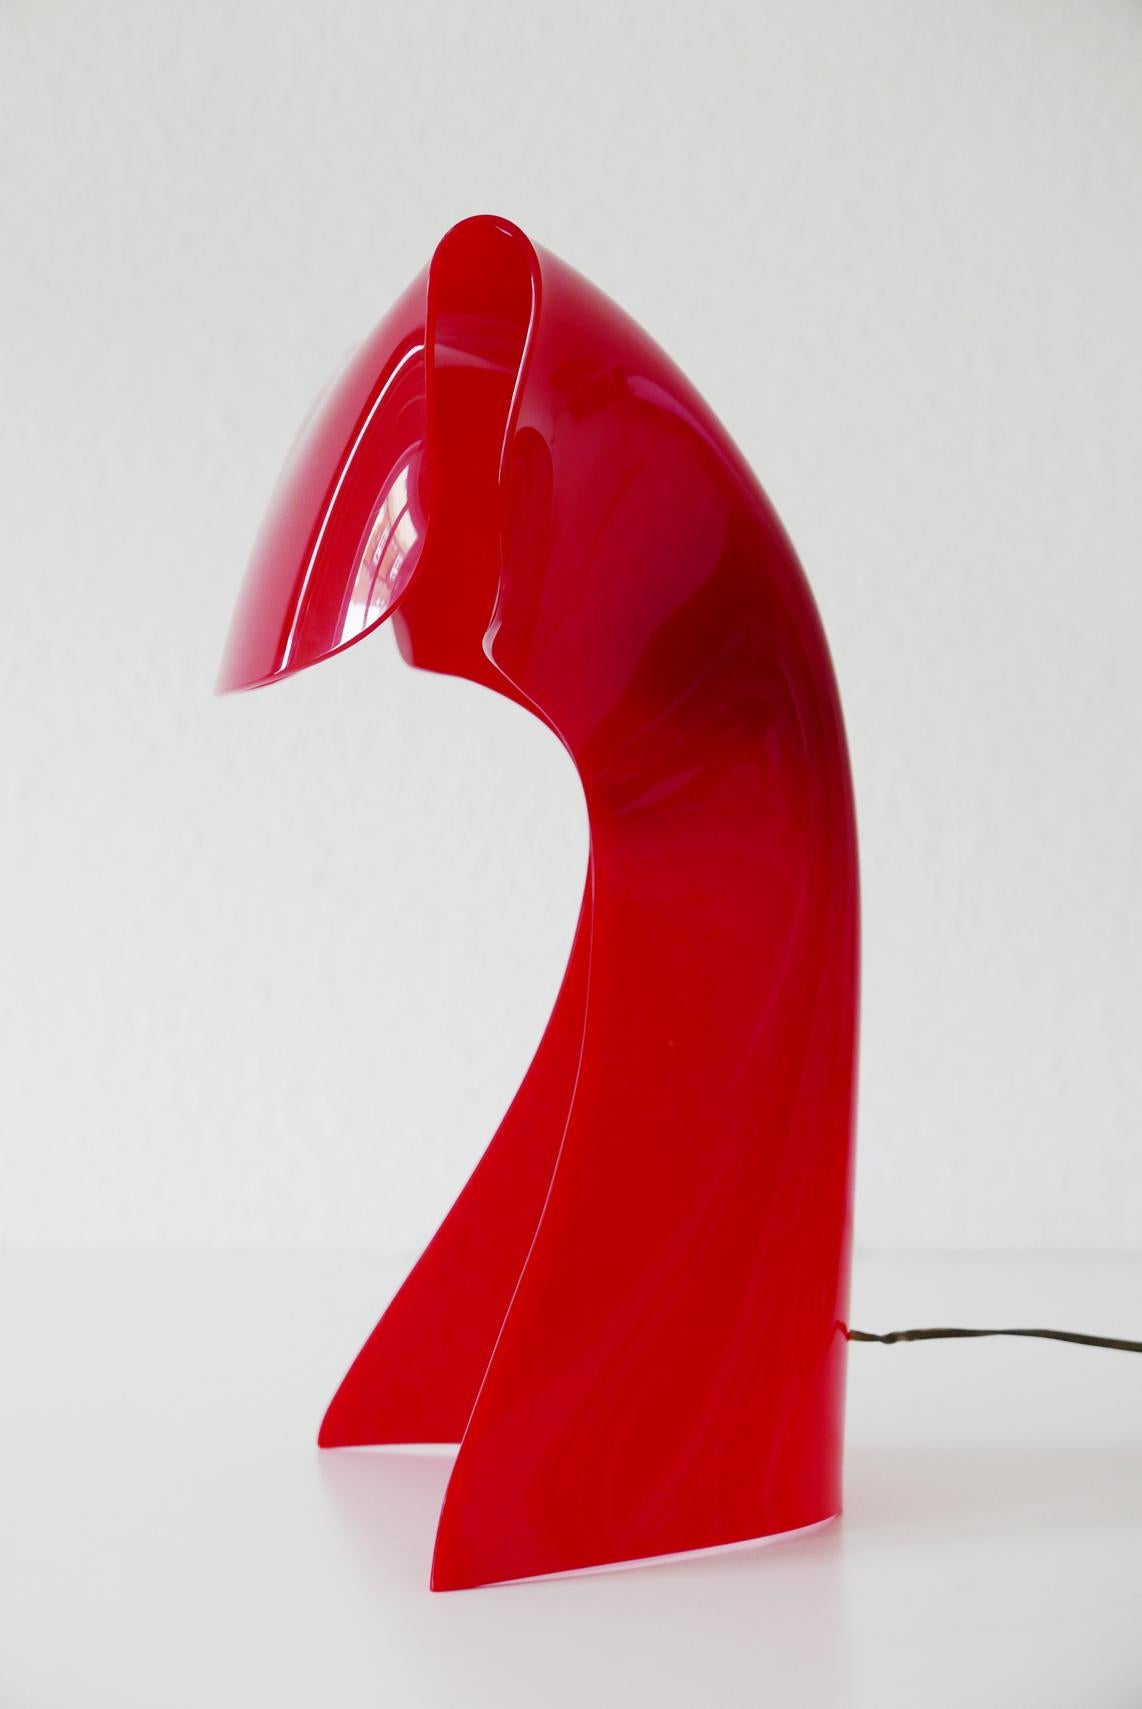 Exceptional Table Lamp by Hanns Hoffmann-Lederer for Heinz Hecht, 1950s, Germany For Sale 1